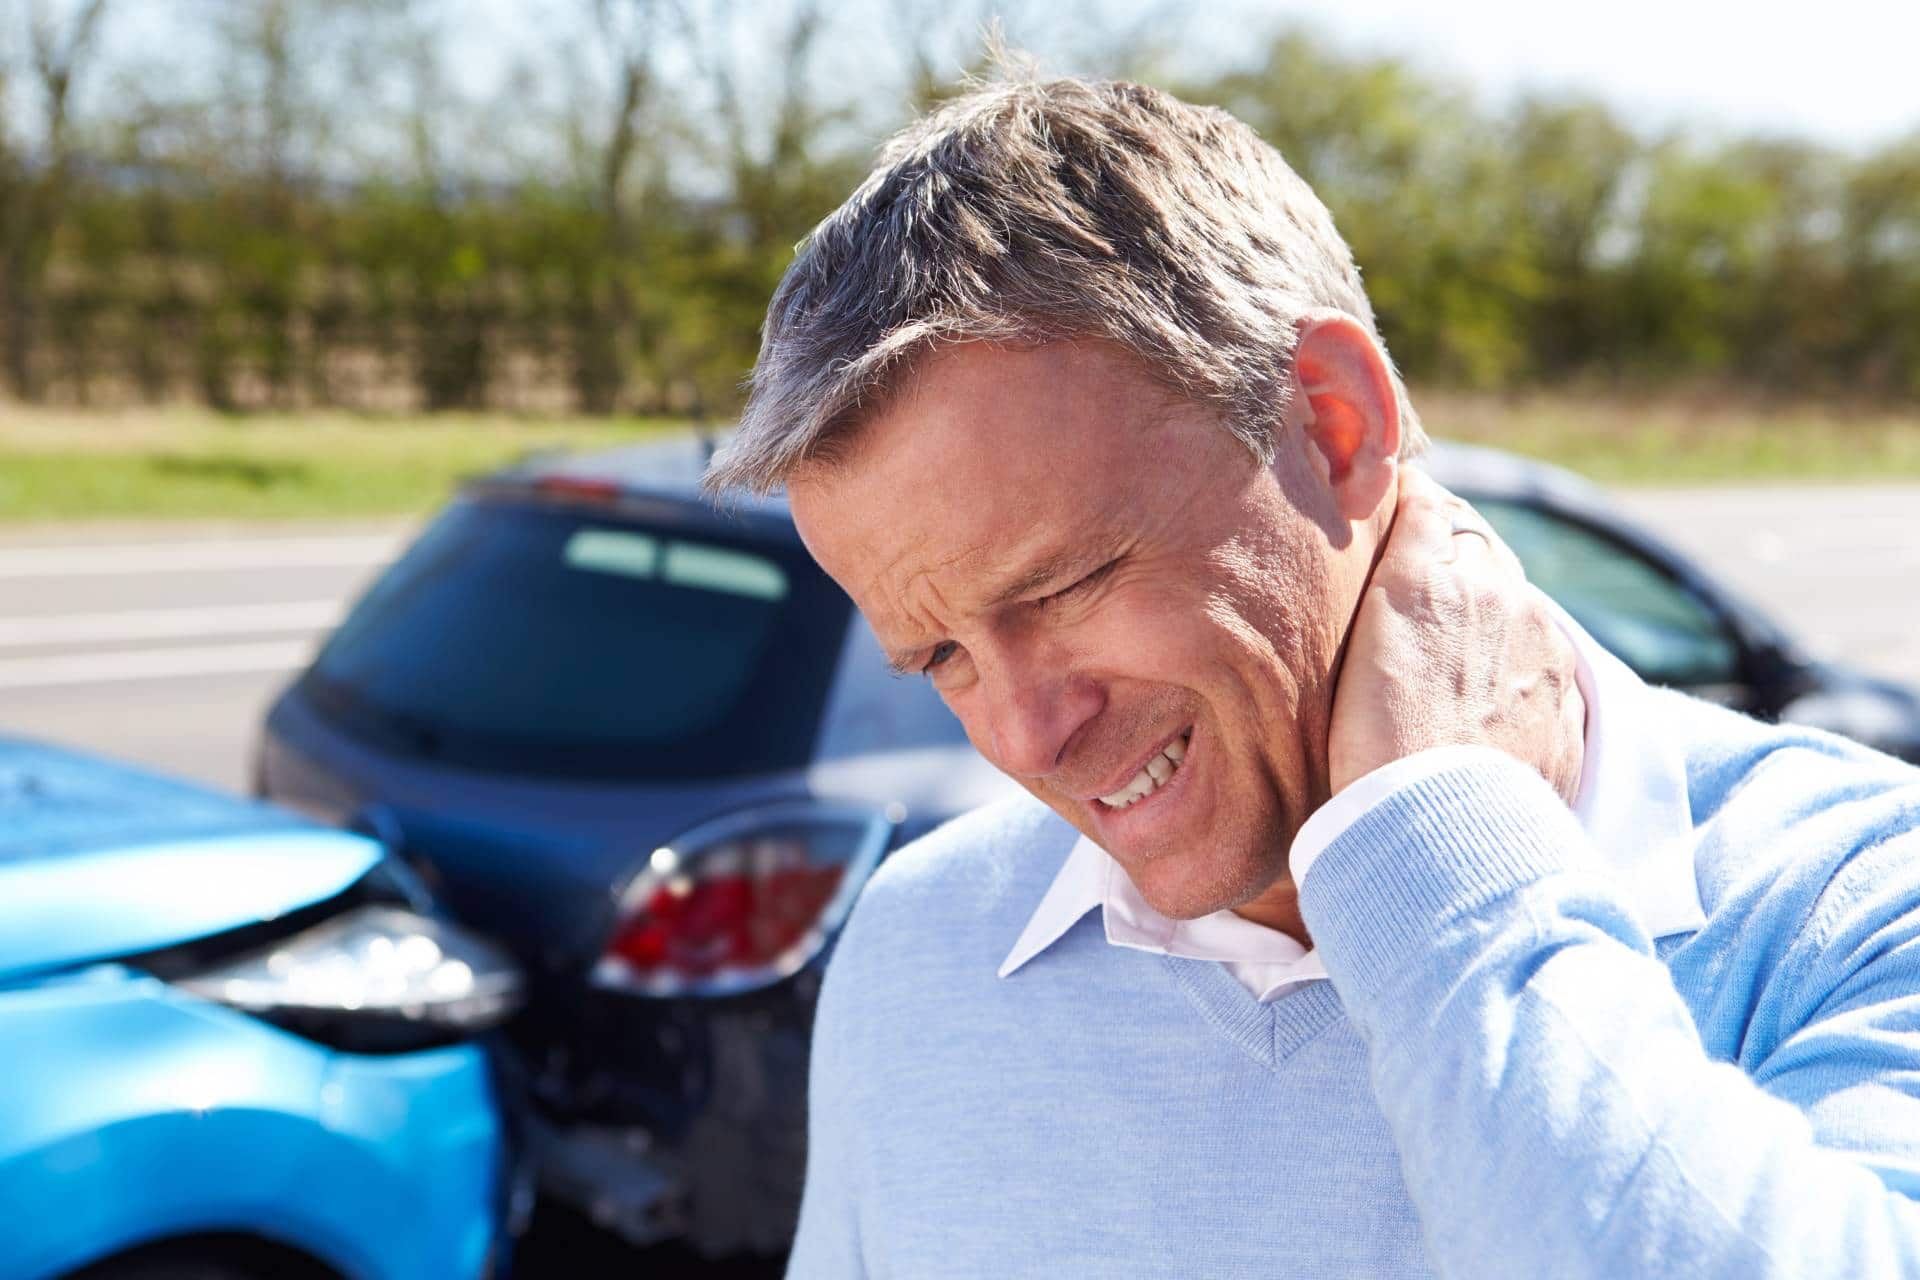 Injured in a car accident? Schedule a free consulation with the Angell Law Firm.